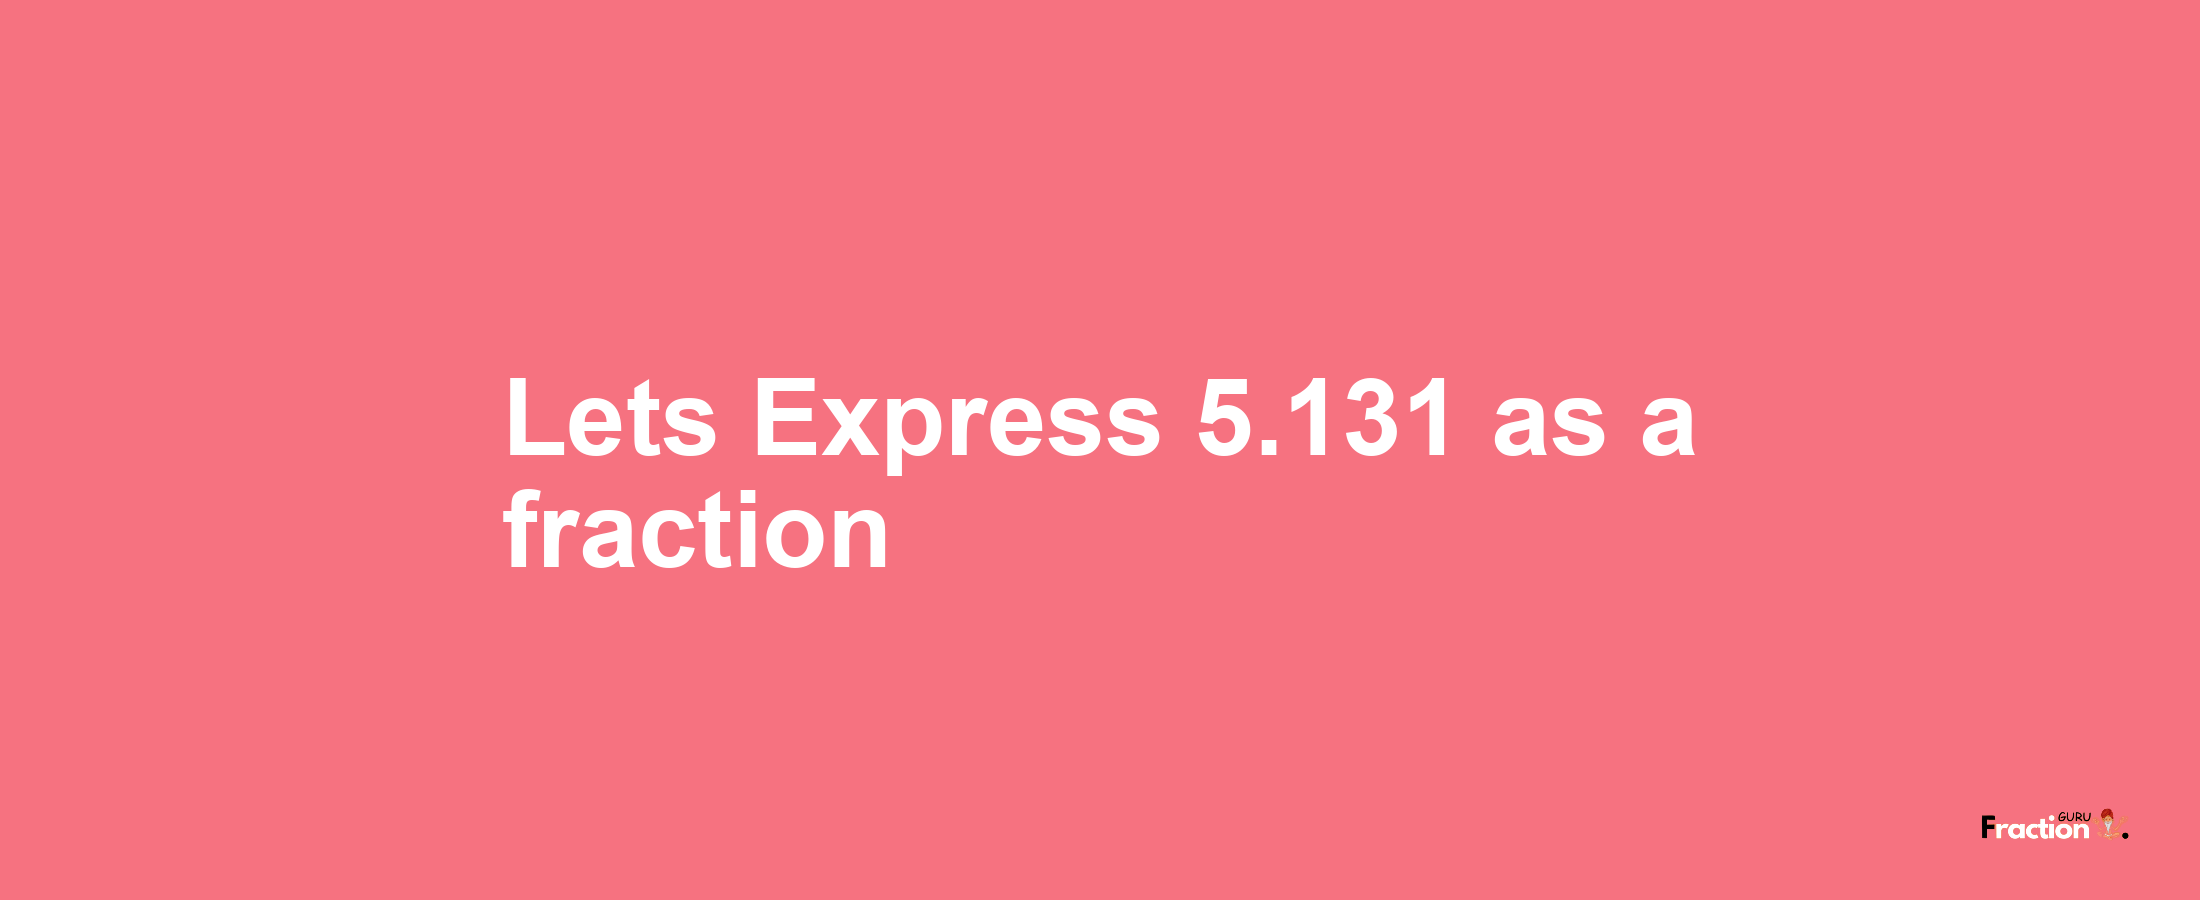 Lets Express 5.131 as afraction